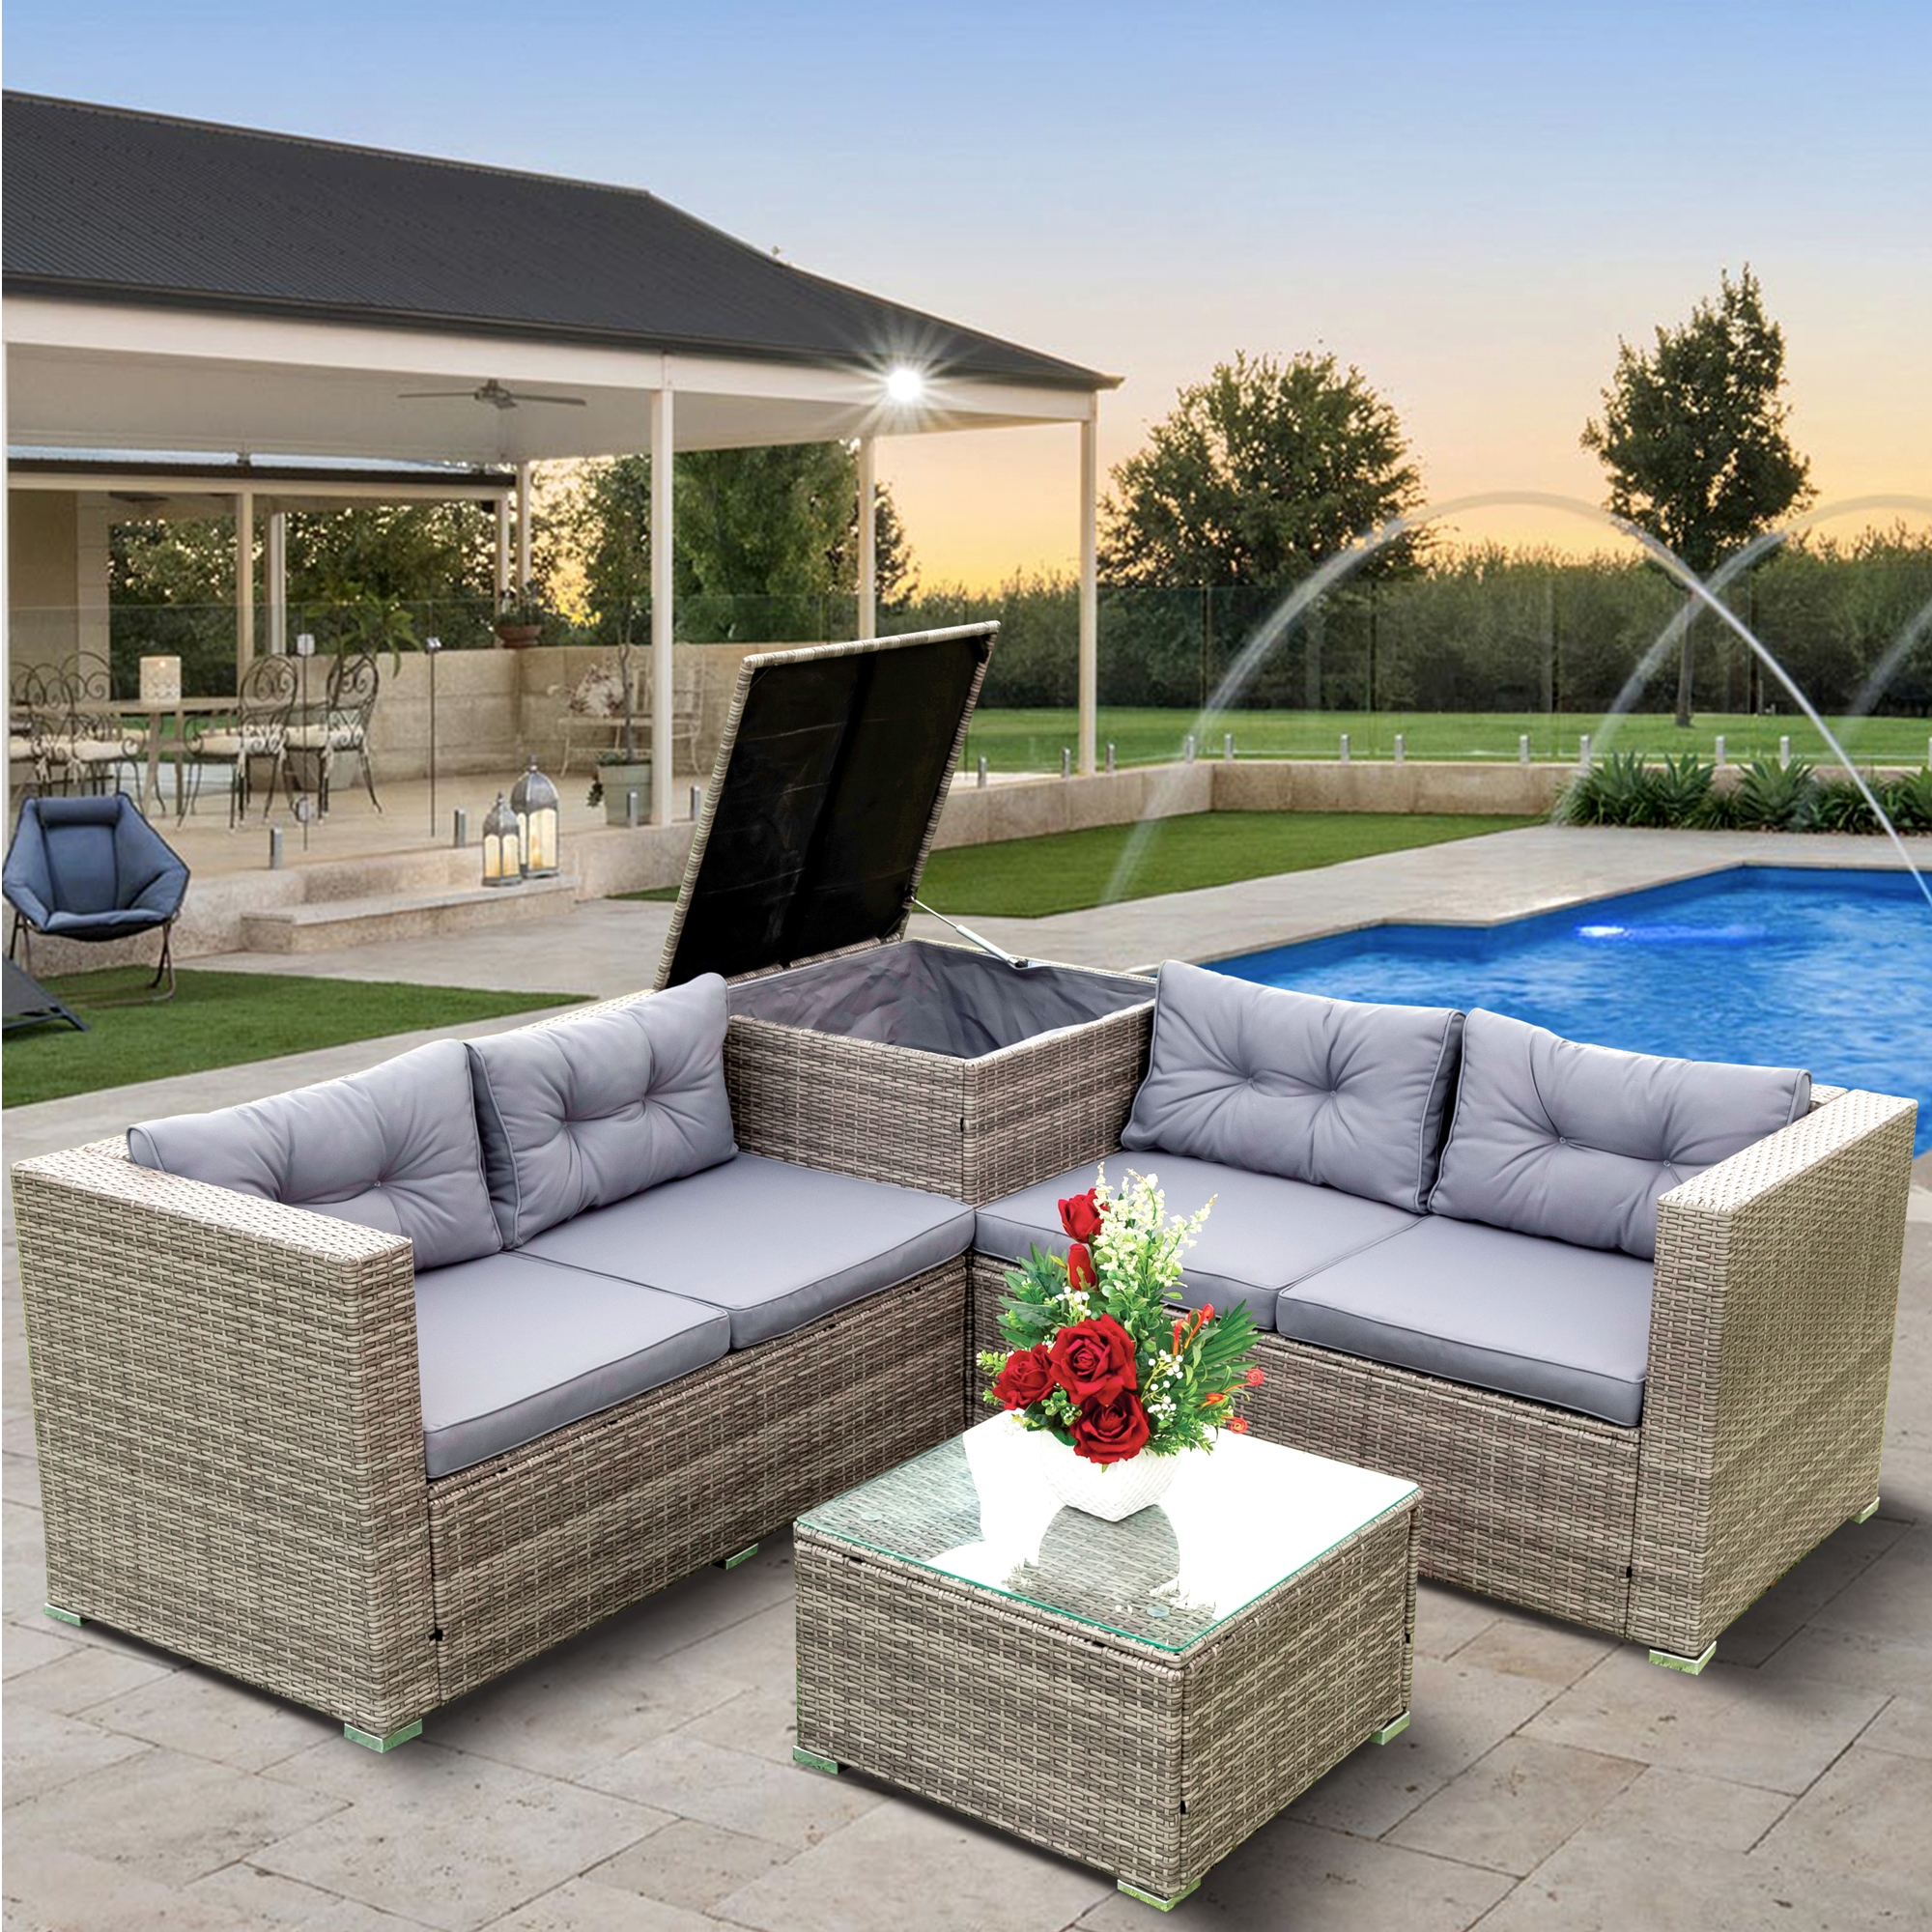 Rattan Patio Sofa Set, 4 Pieces Outdoor Sectional Furniture, All-Weather PE Rattan Wicker Patio Conversation, Cushioned Sofa Set with Glass Table & Storage Box for Patio Garden Poolside Deck - image 1 of 10